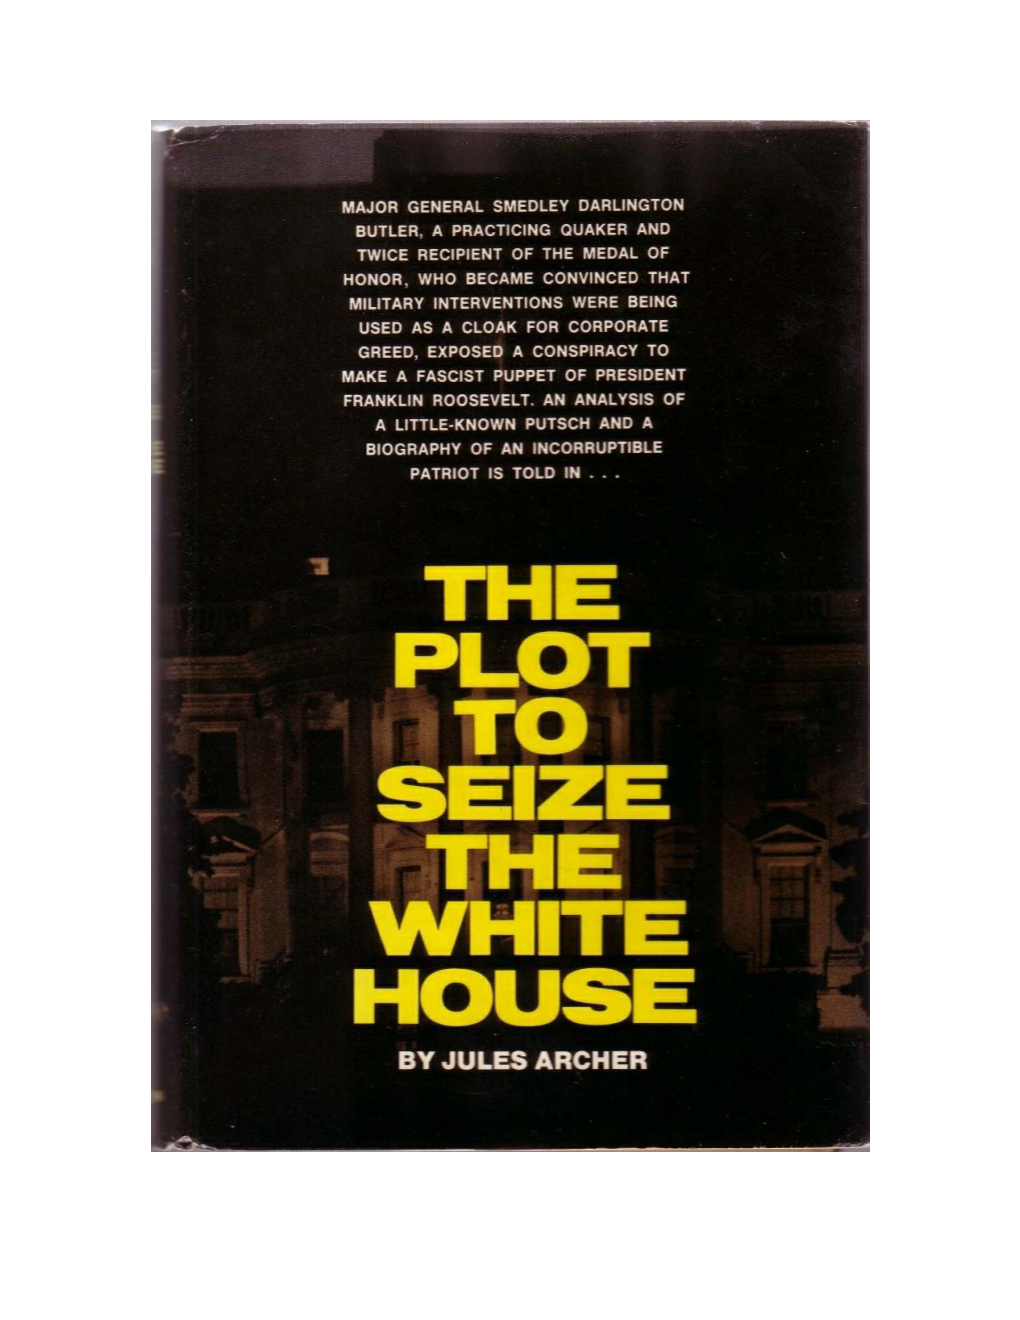 To Seize the White House by Jules Archer